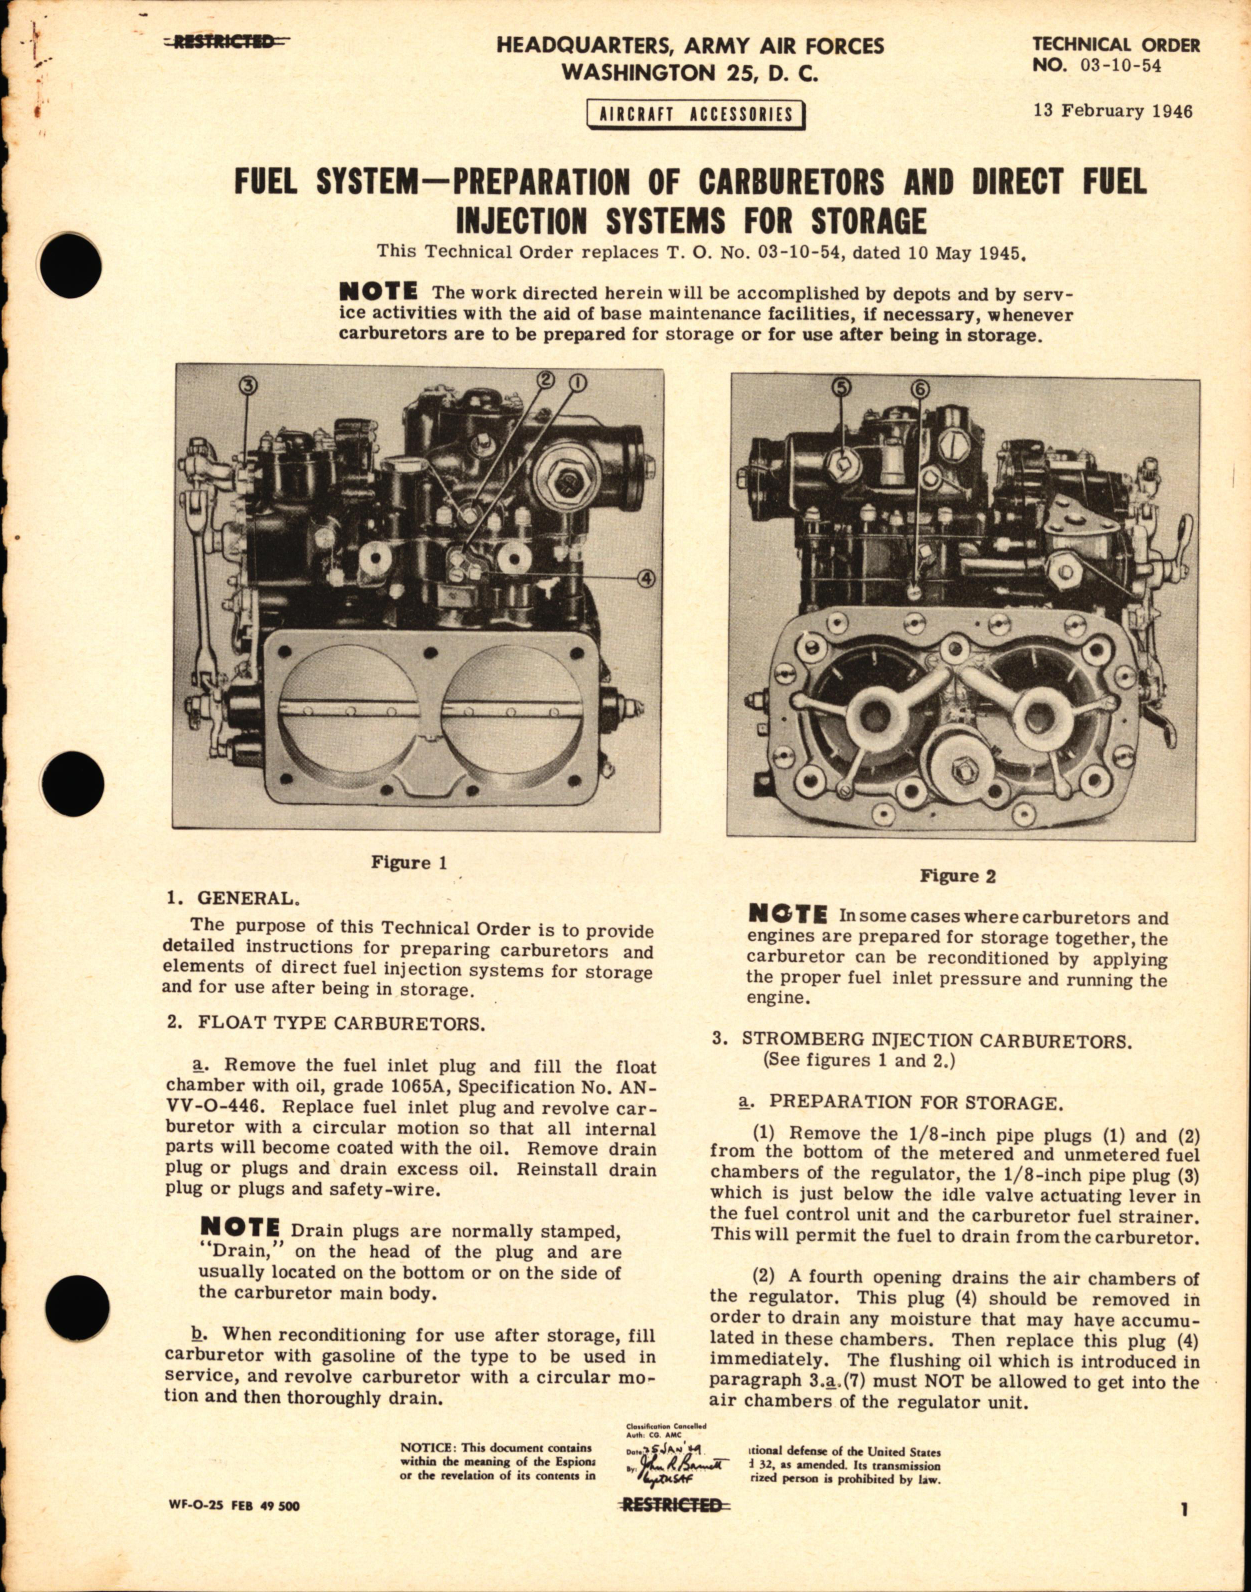 Sample page 1 from AirCorps Library document: Preparation of Carburetors and Direct Fuel Injection Systems for Storage